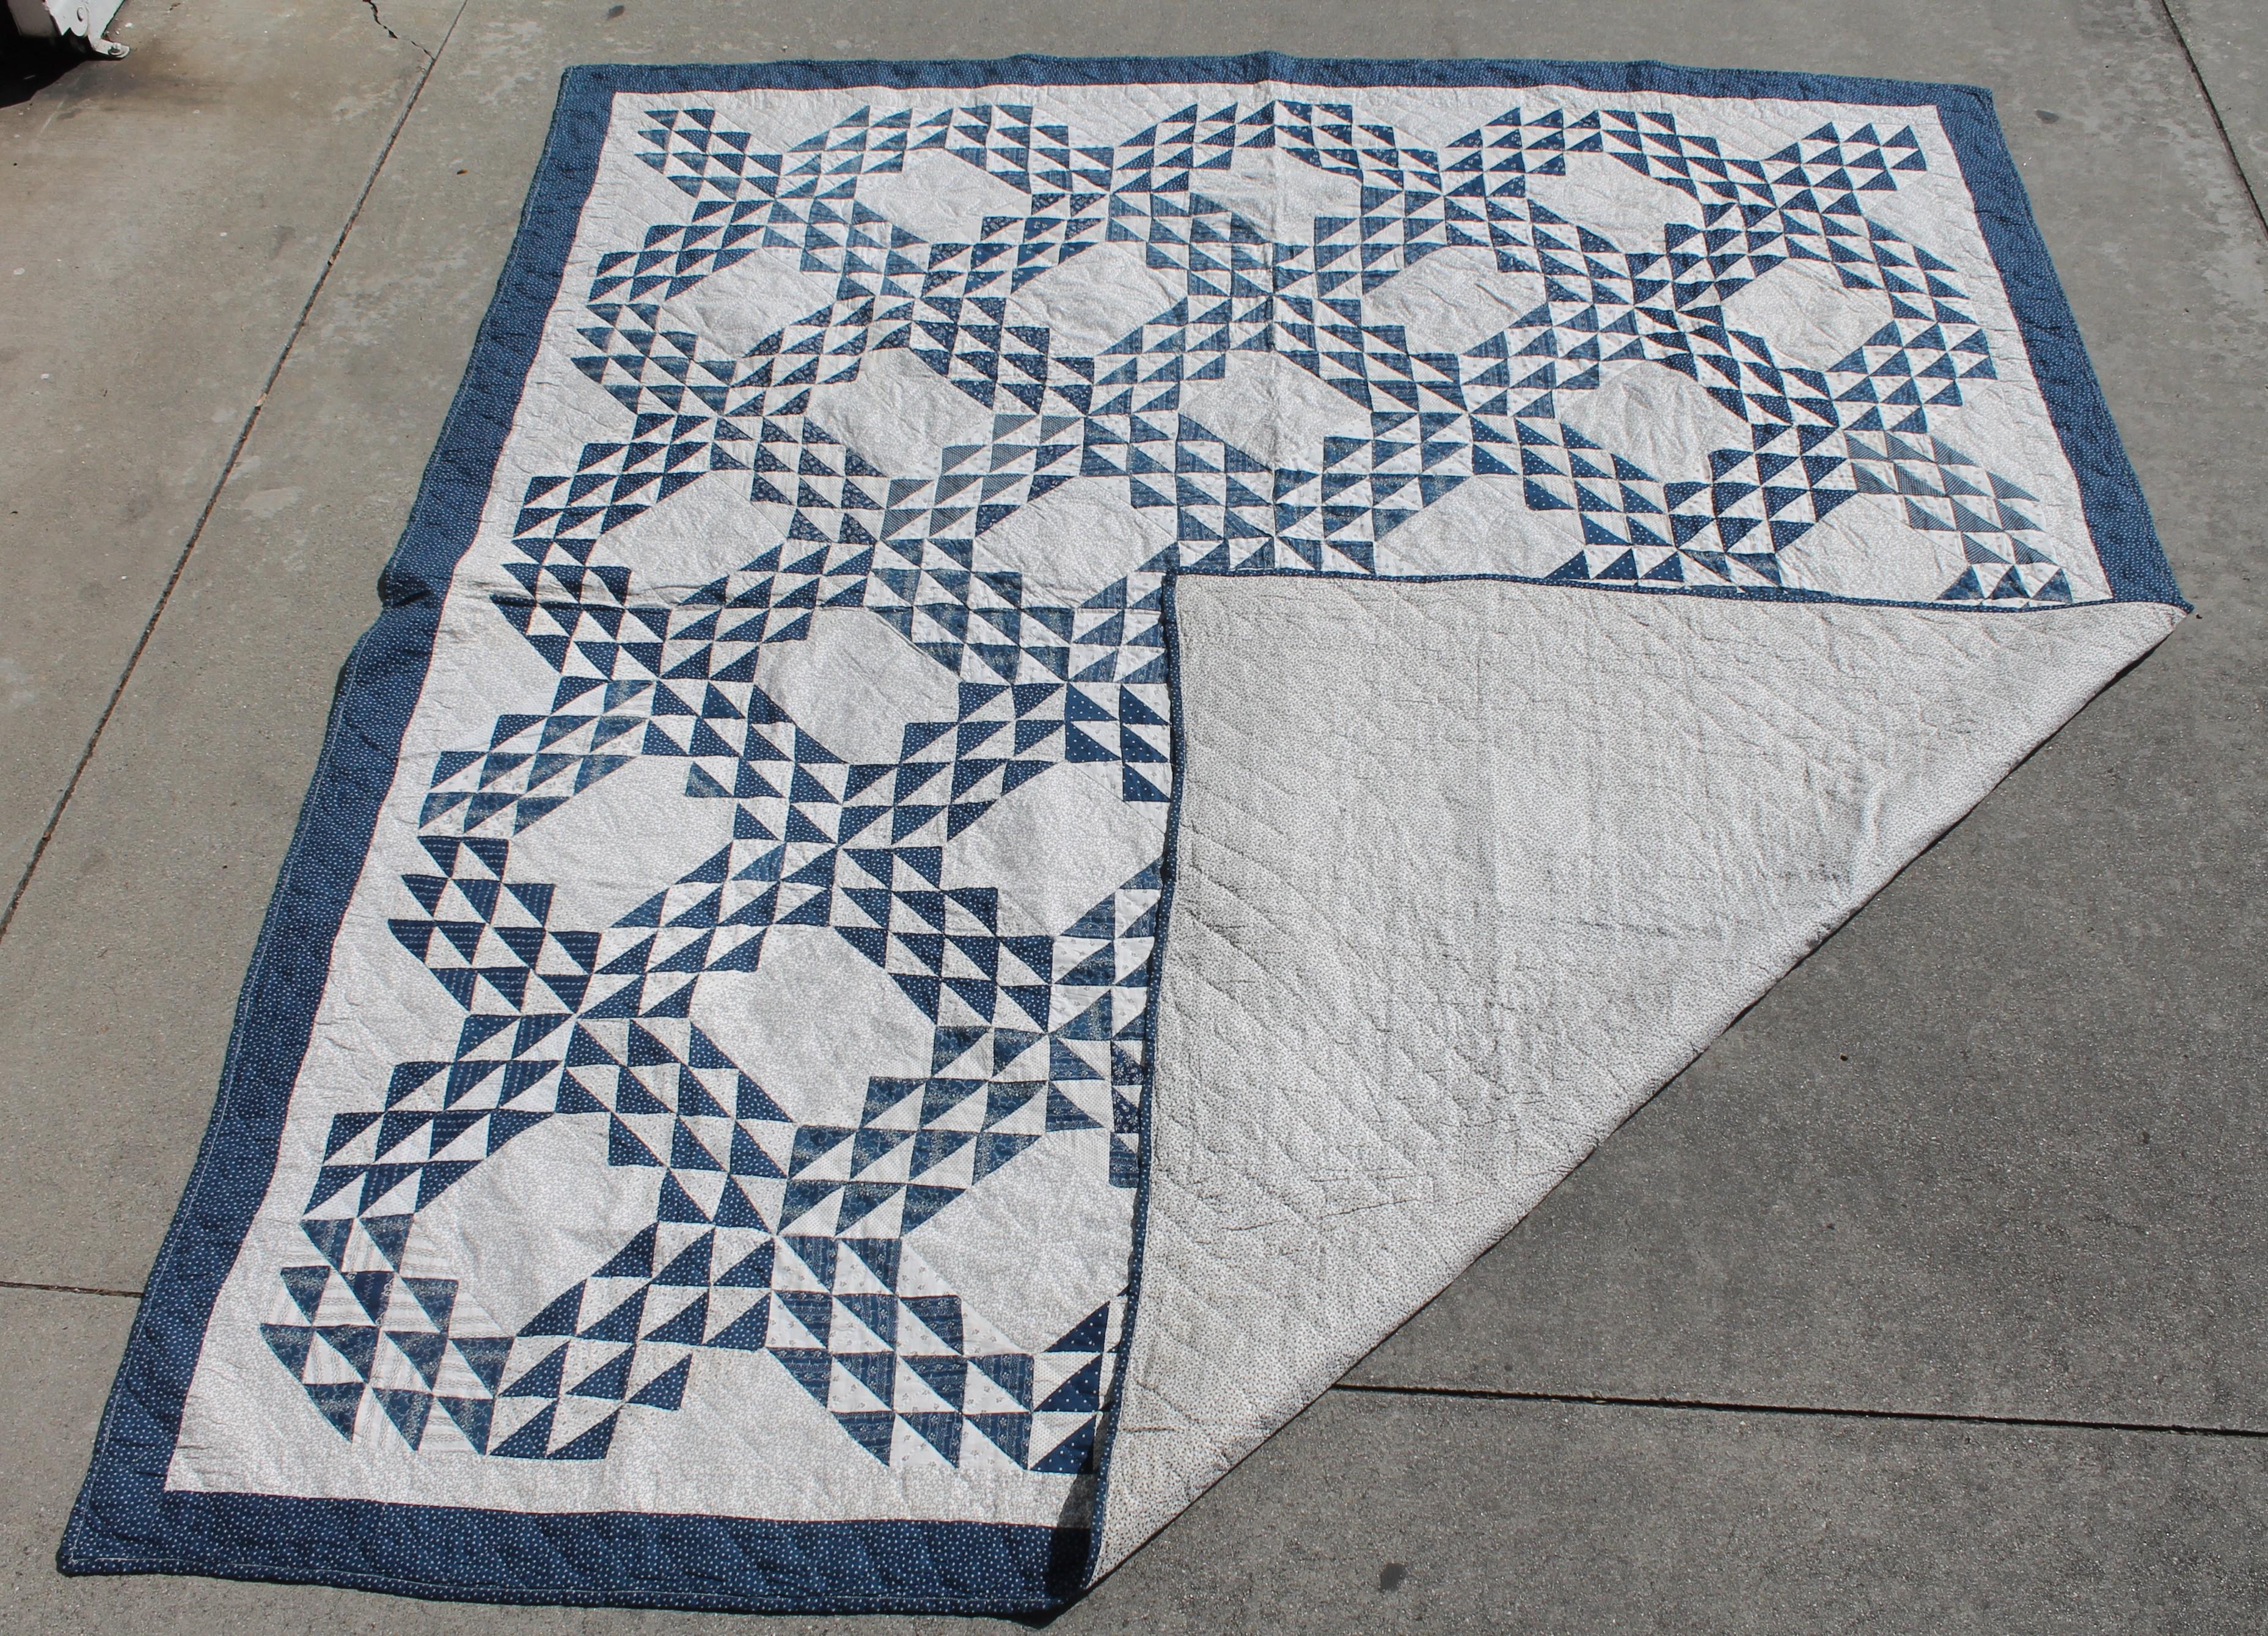 19th century blue and white ocean waves quilt in pristine condition. The white is a black and white calico print fabric. This quilt is from Pennsylvania and is a large generous size. The piecing and quilting are fantastic and it is a summer weight